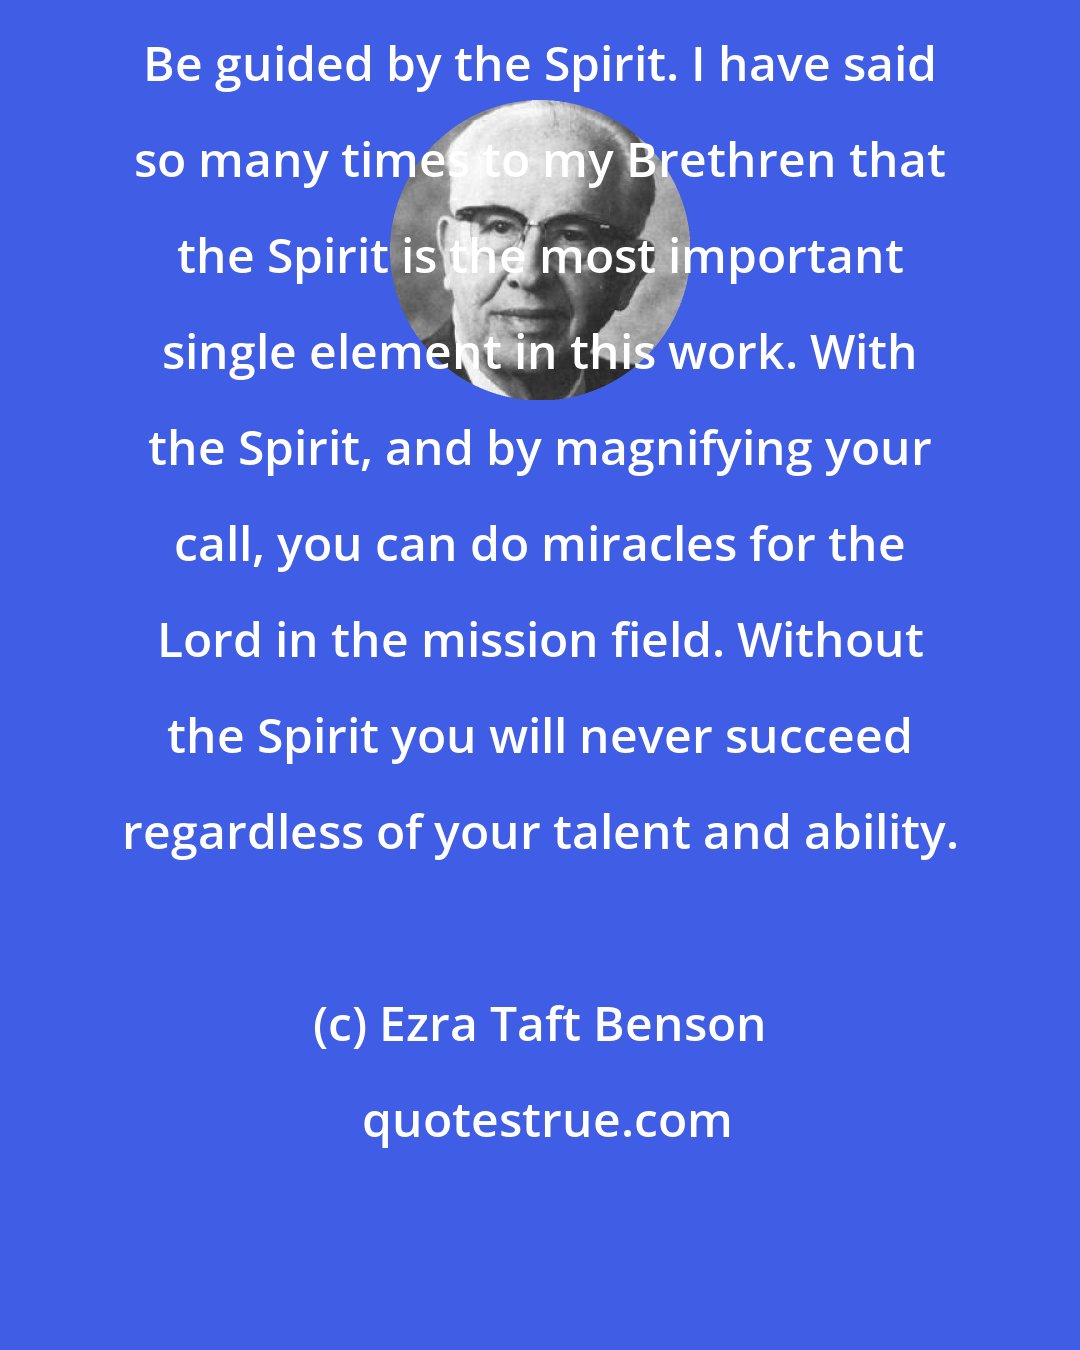 Ezra Taft Benson: Be guided by the Spirit. I have said so many times to my Brethren that the Spirit is the most important single element in this work. With the Spirit, and by magnifying your call, you can do miracles for the Lord in the mission field. Without the Spirit you will never succeed regardless of your talent and ability.